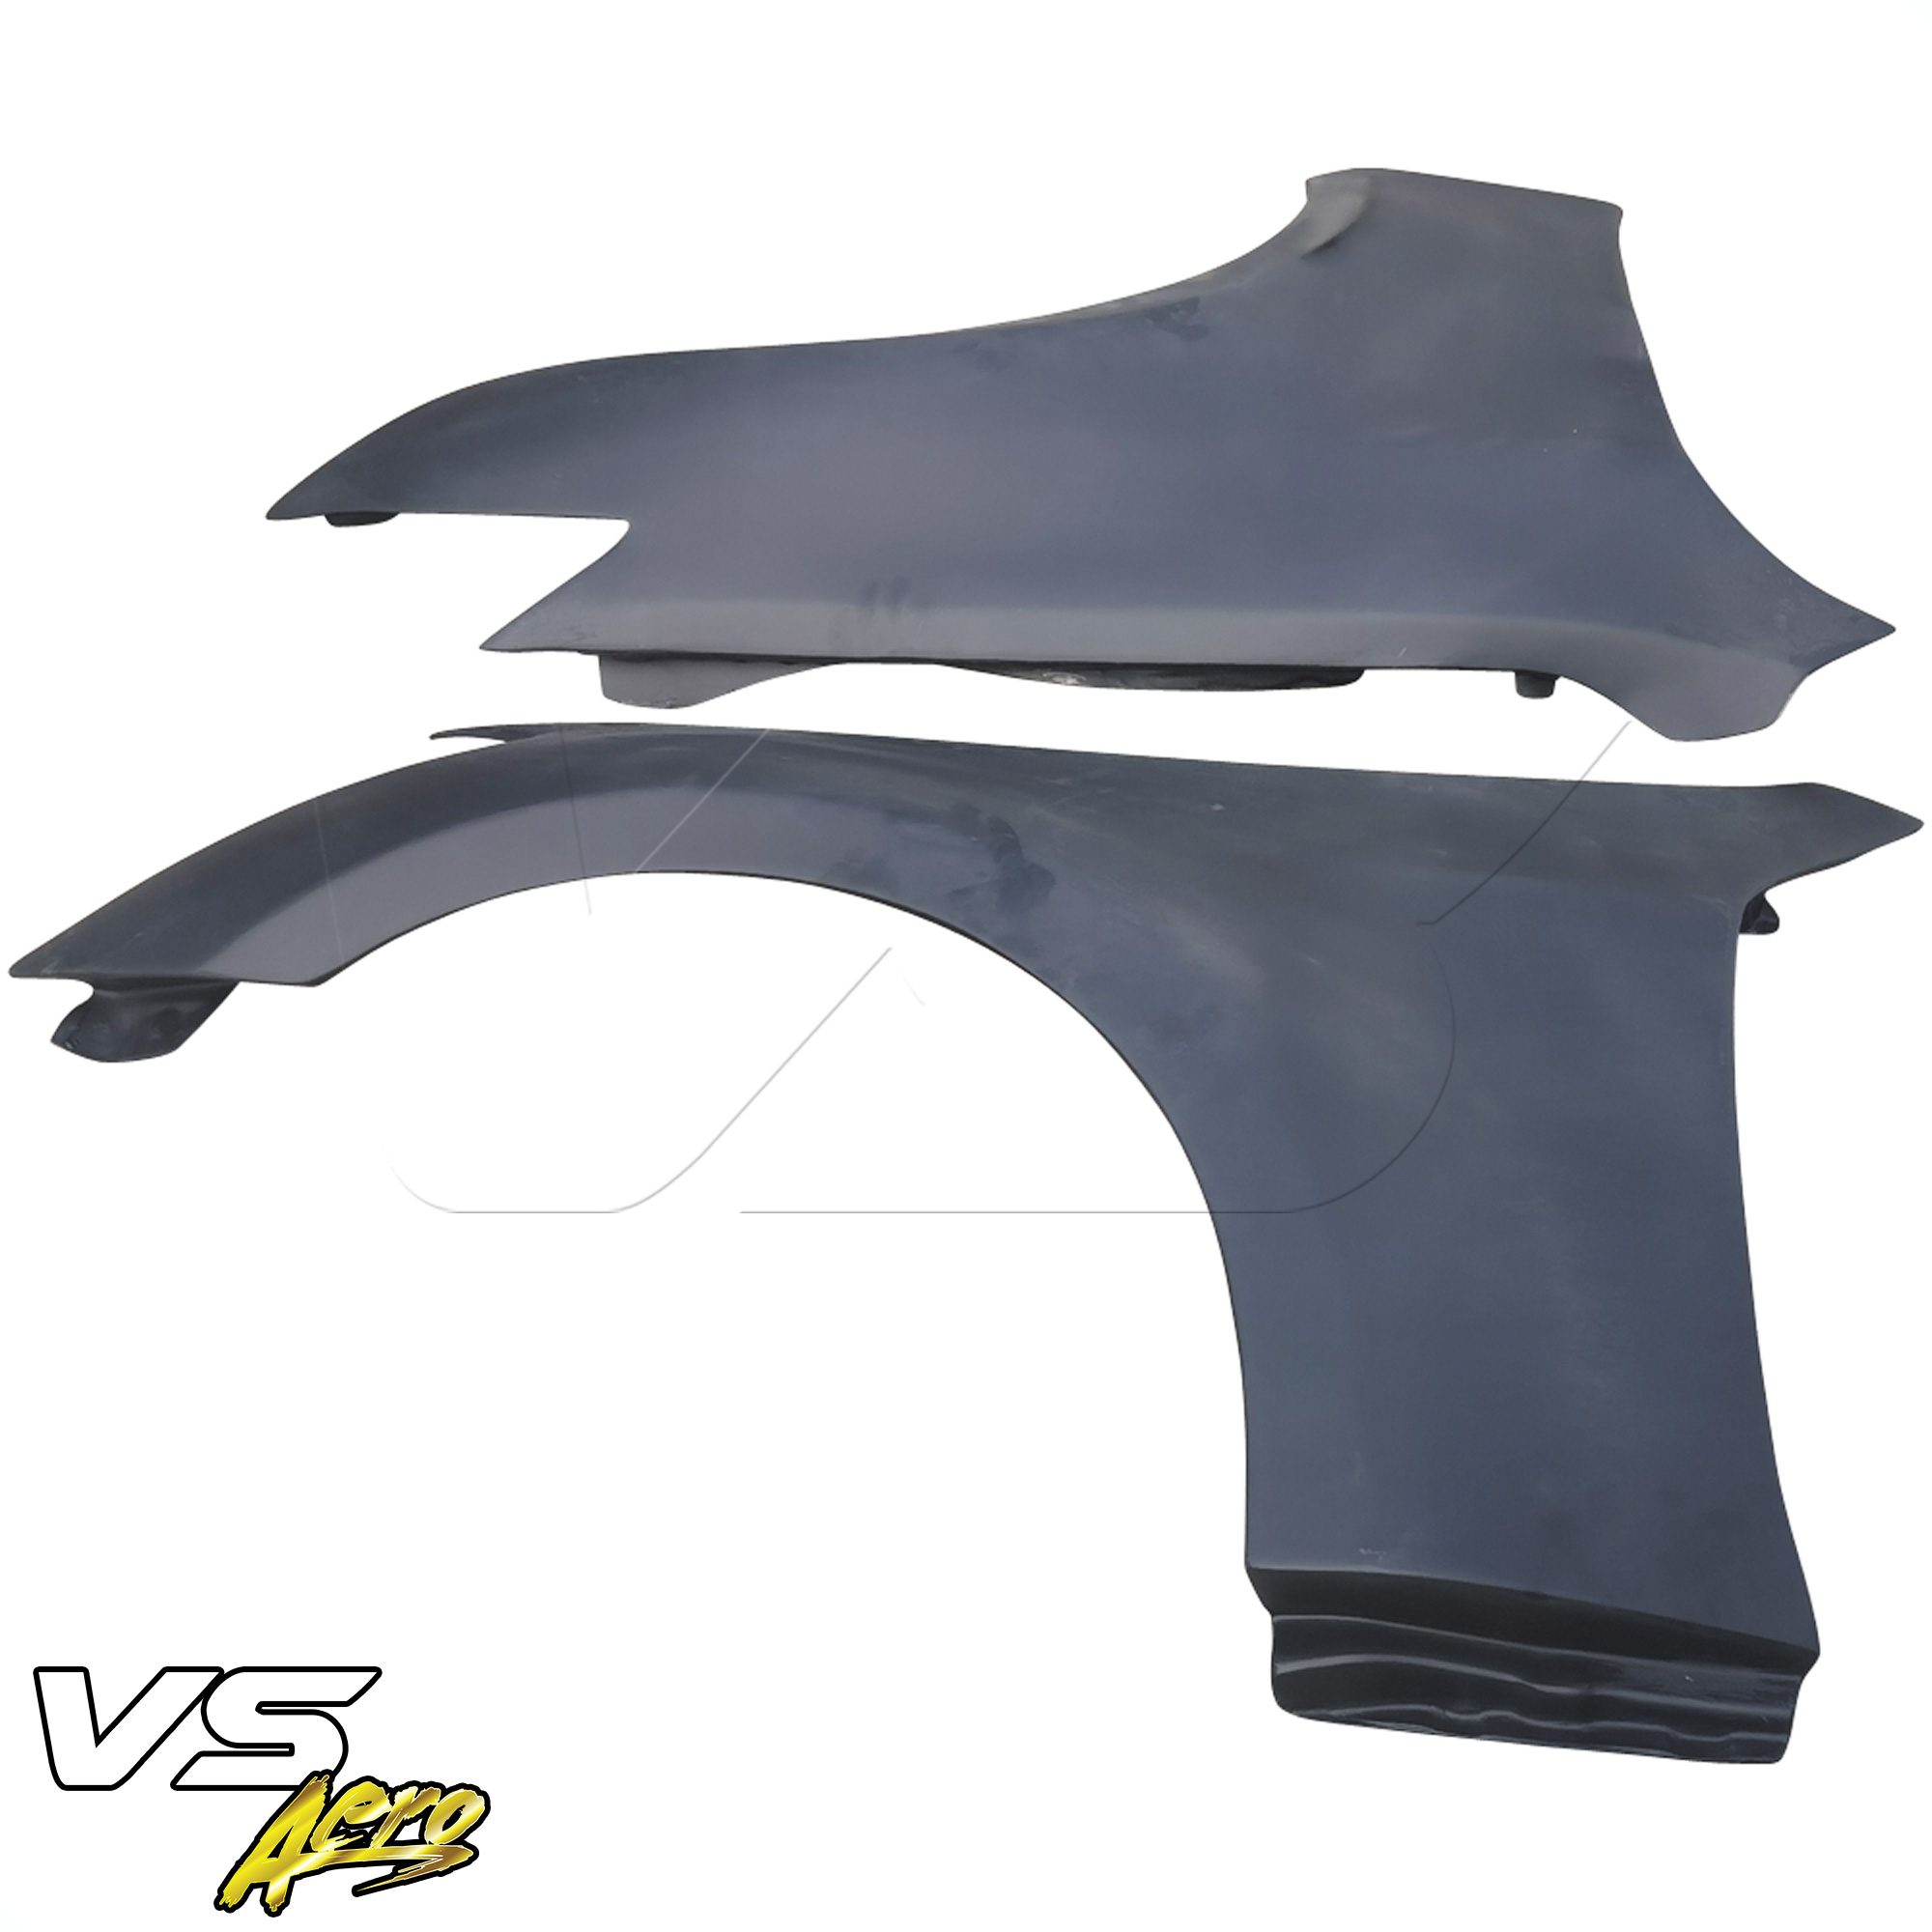 VSaero FRP APBR Wide Body Fenders (front) > Infiniti G35 Coupe 2003-2006 > 2dr Coupe - Image 7